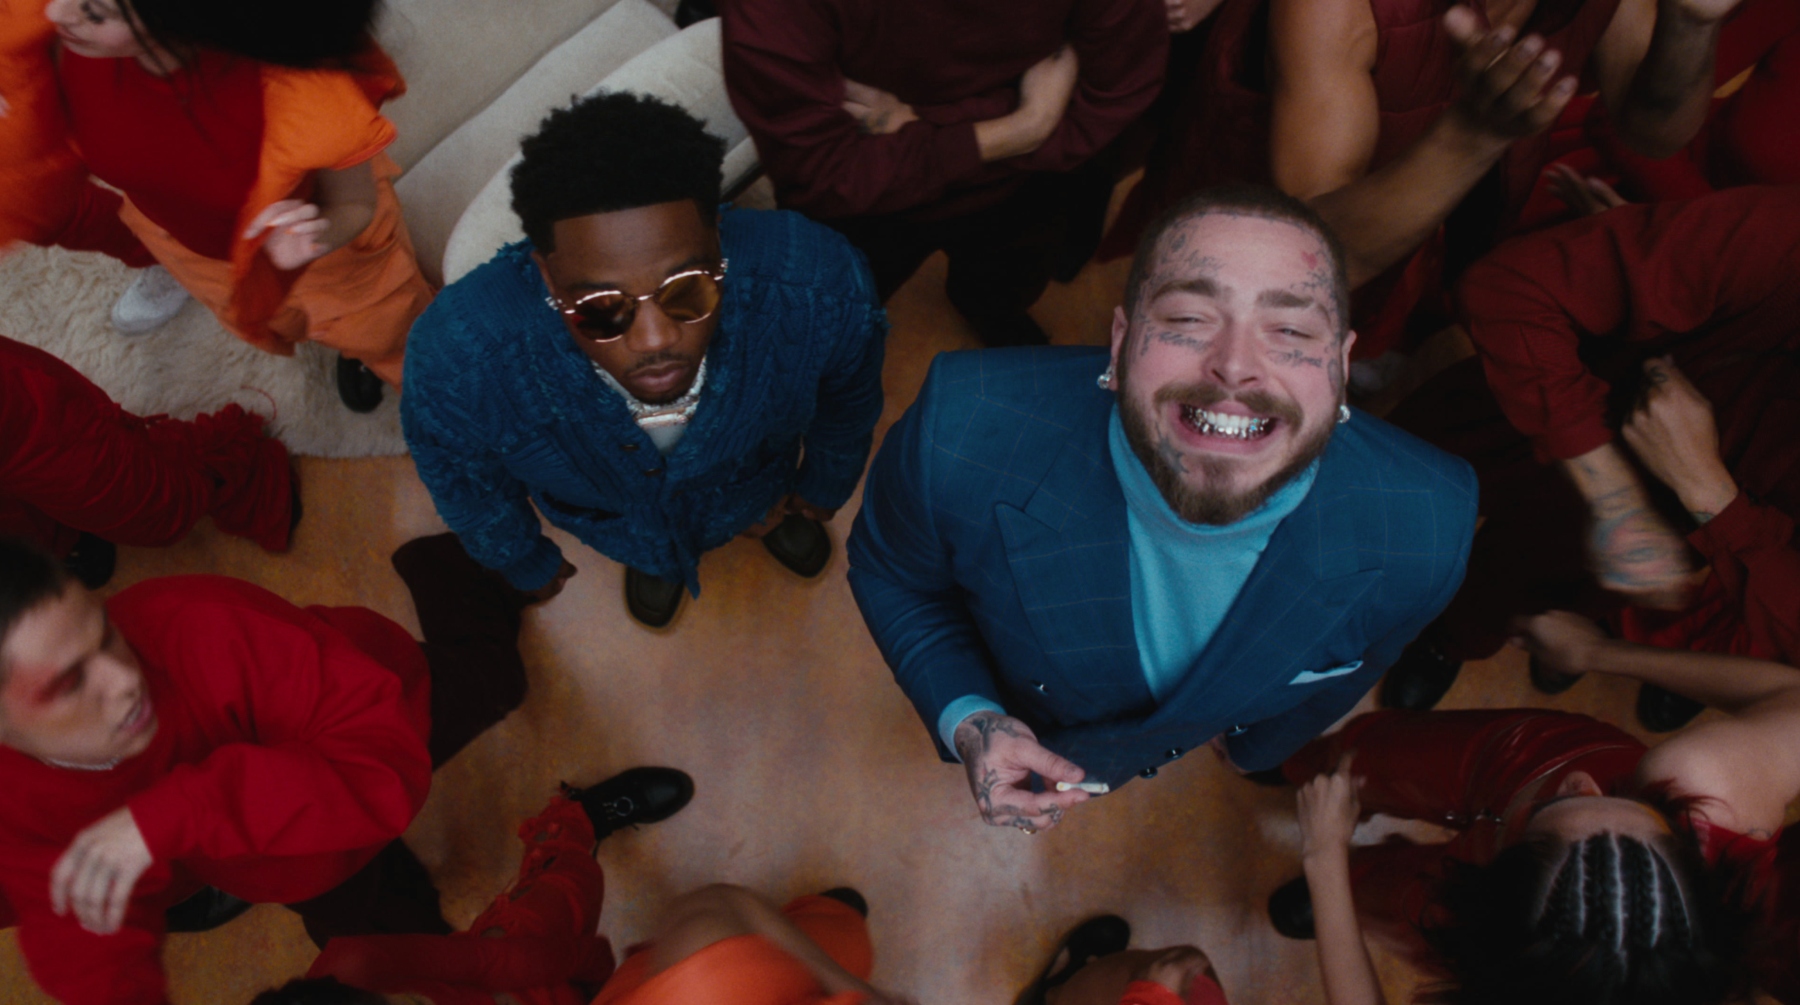 Post Malone Releases Music Video For New Single "Cooped Up" With Roddy Ricch